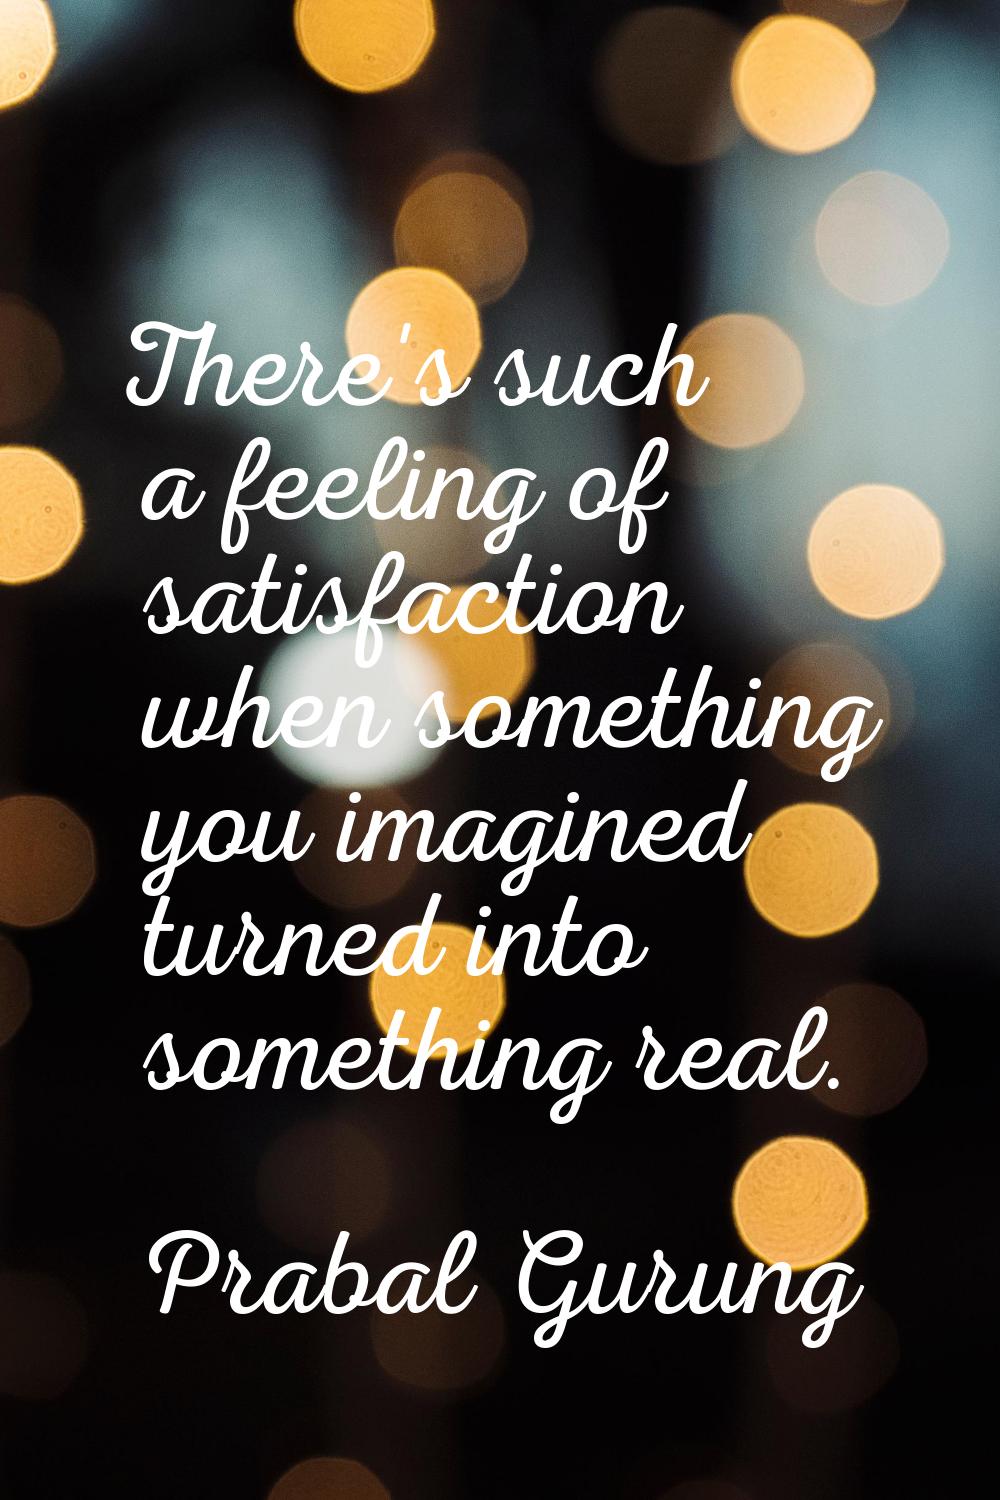 There's such a feeling of satisfaction when something you imagined turned into something real.